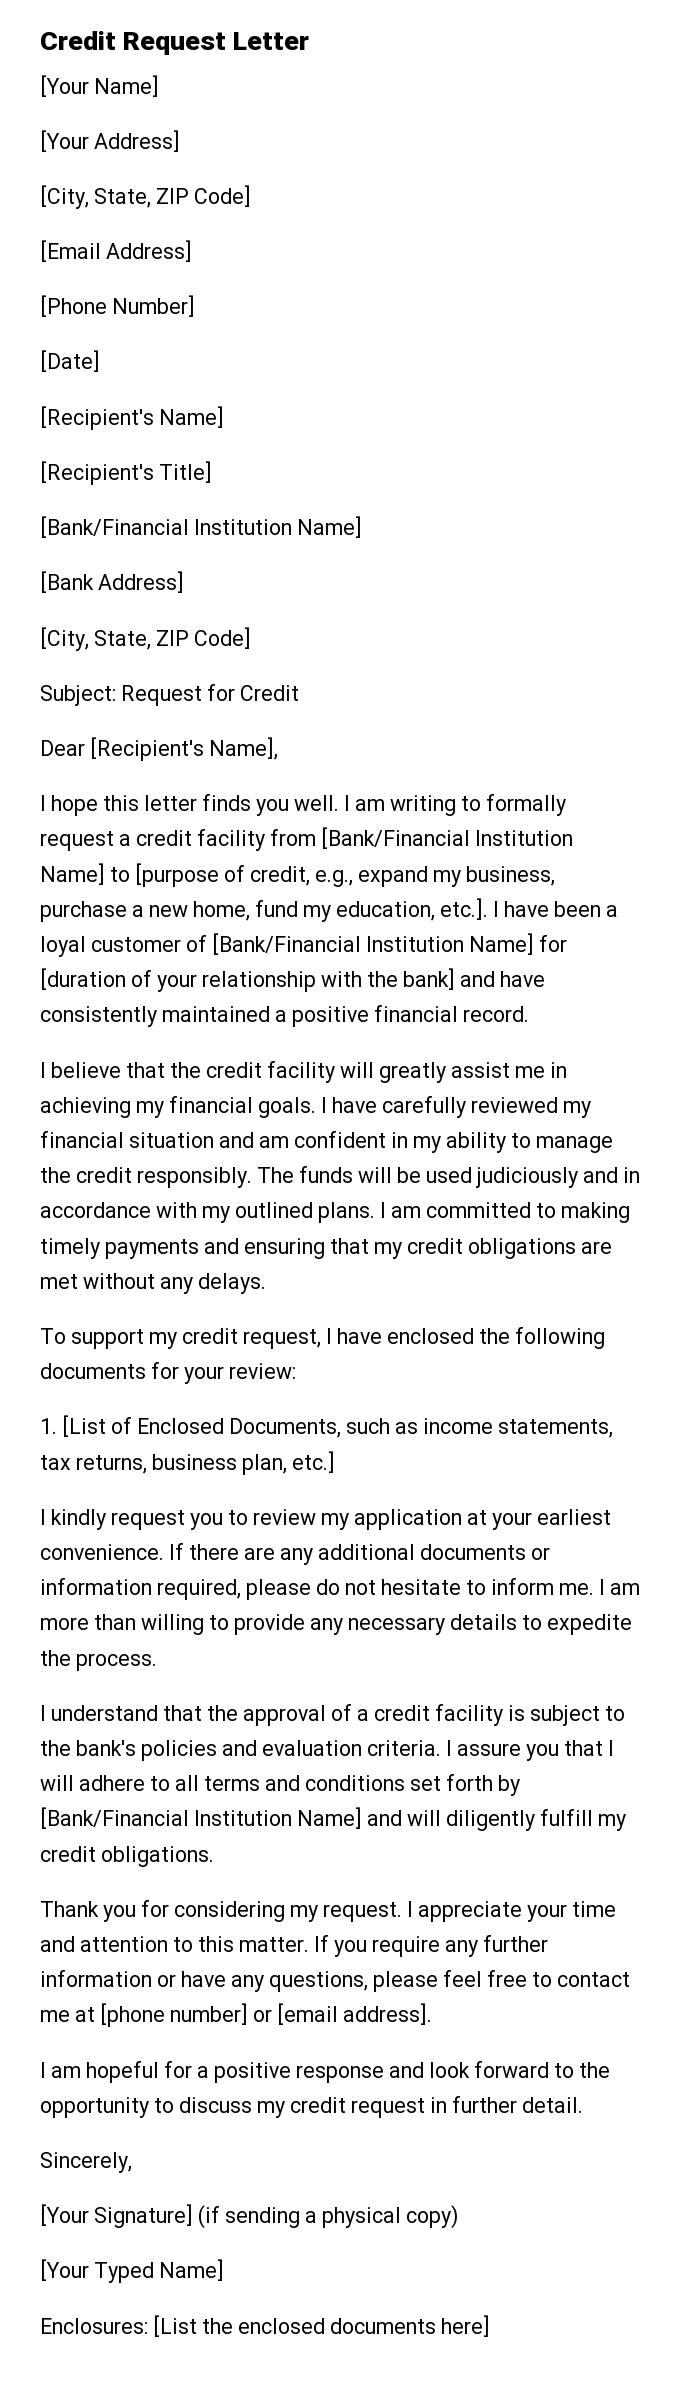 Credit Request Letter